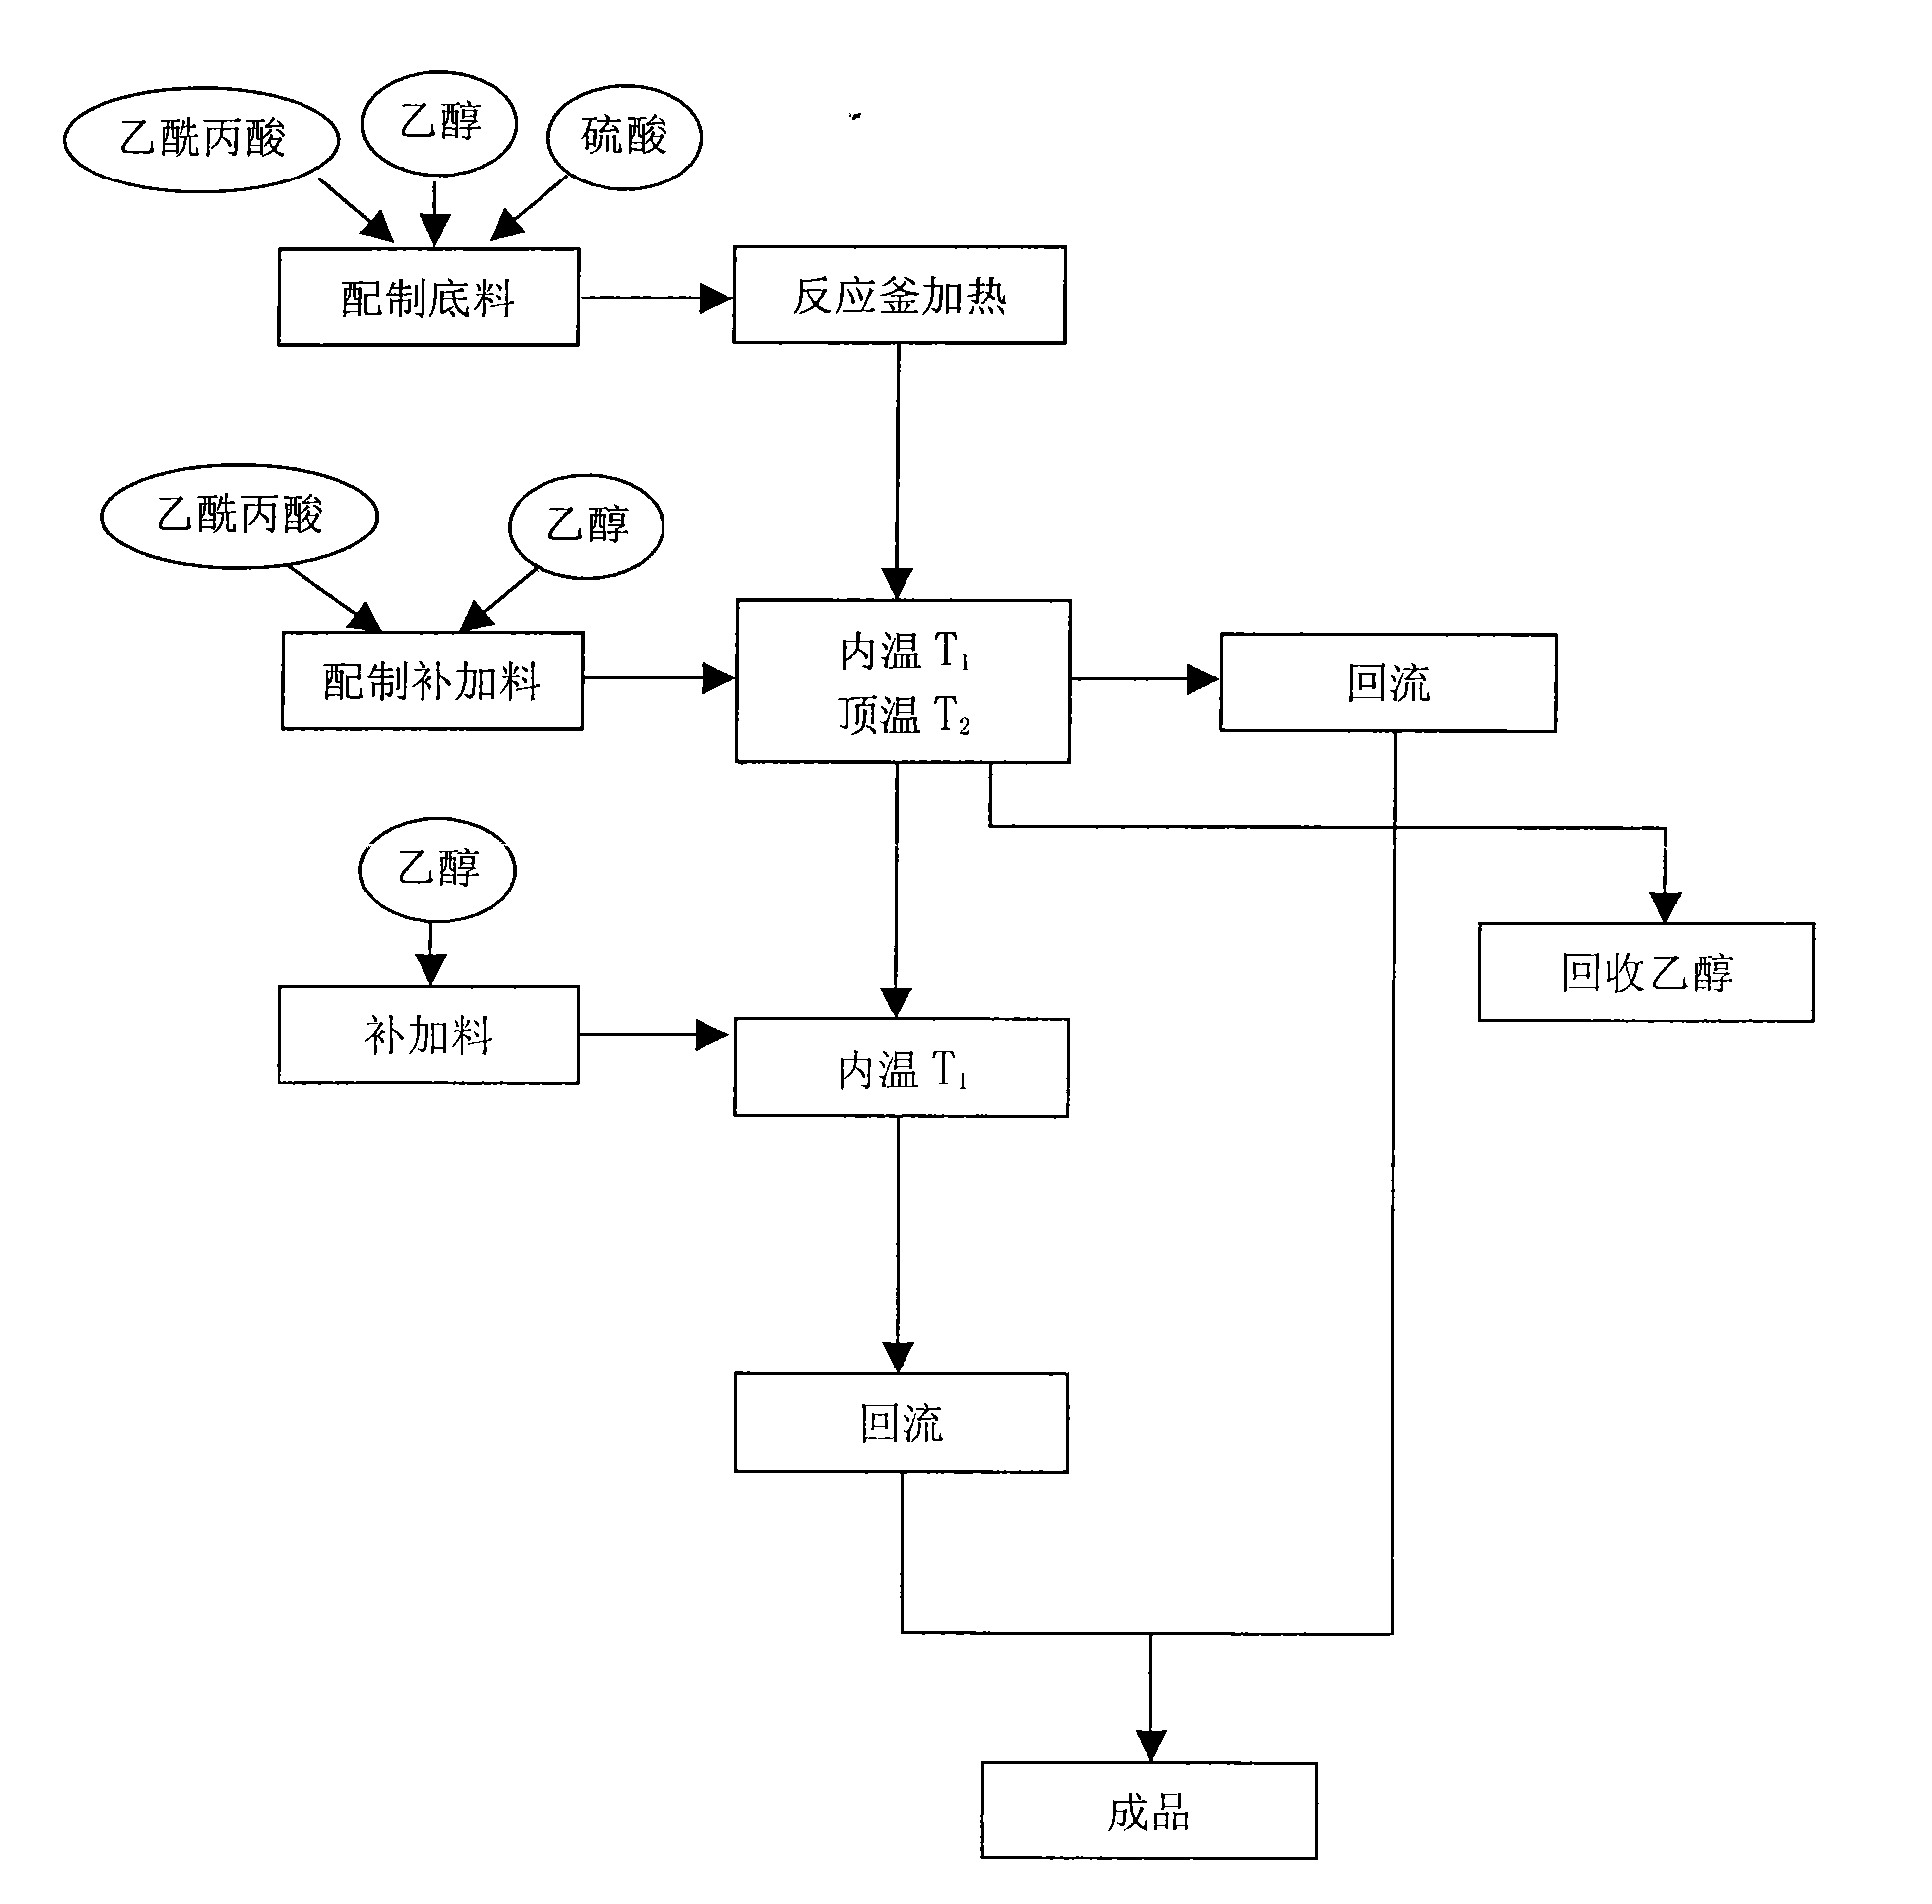 Process for producing ethyl levulinate